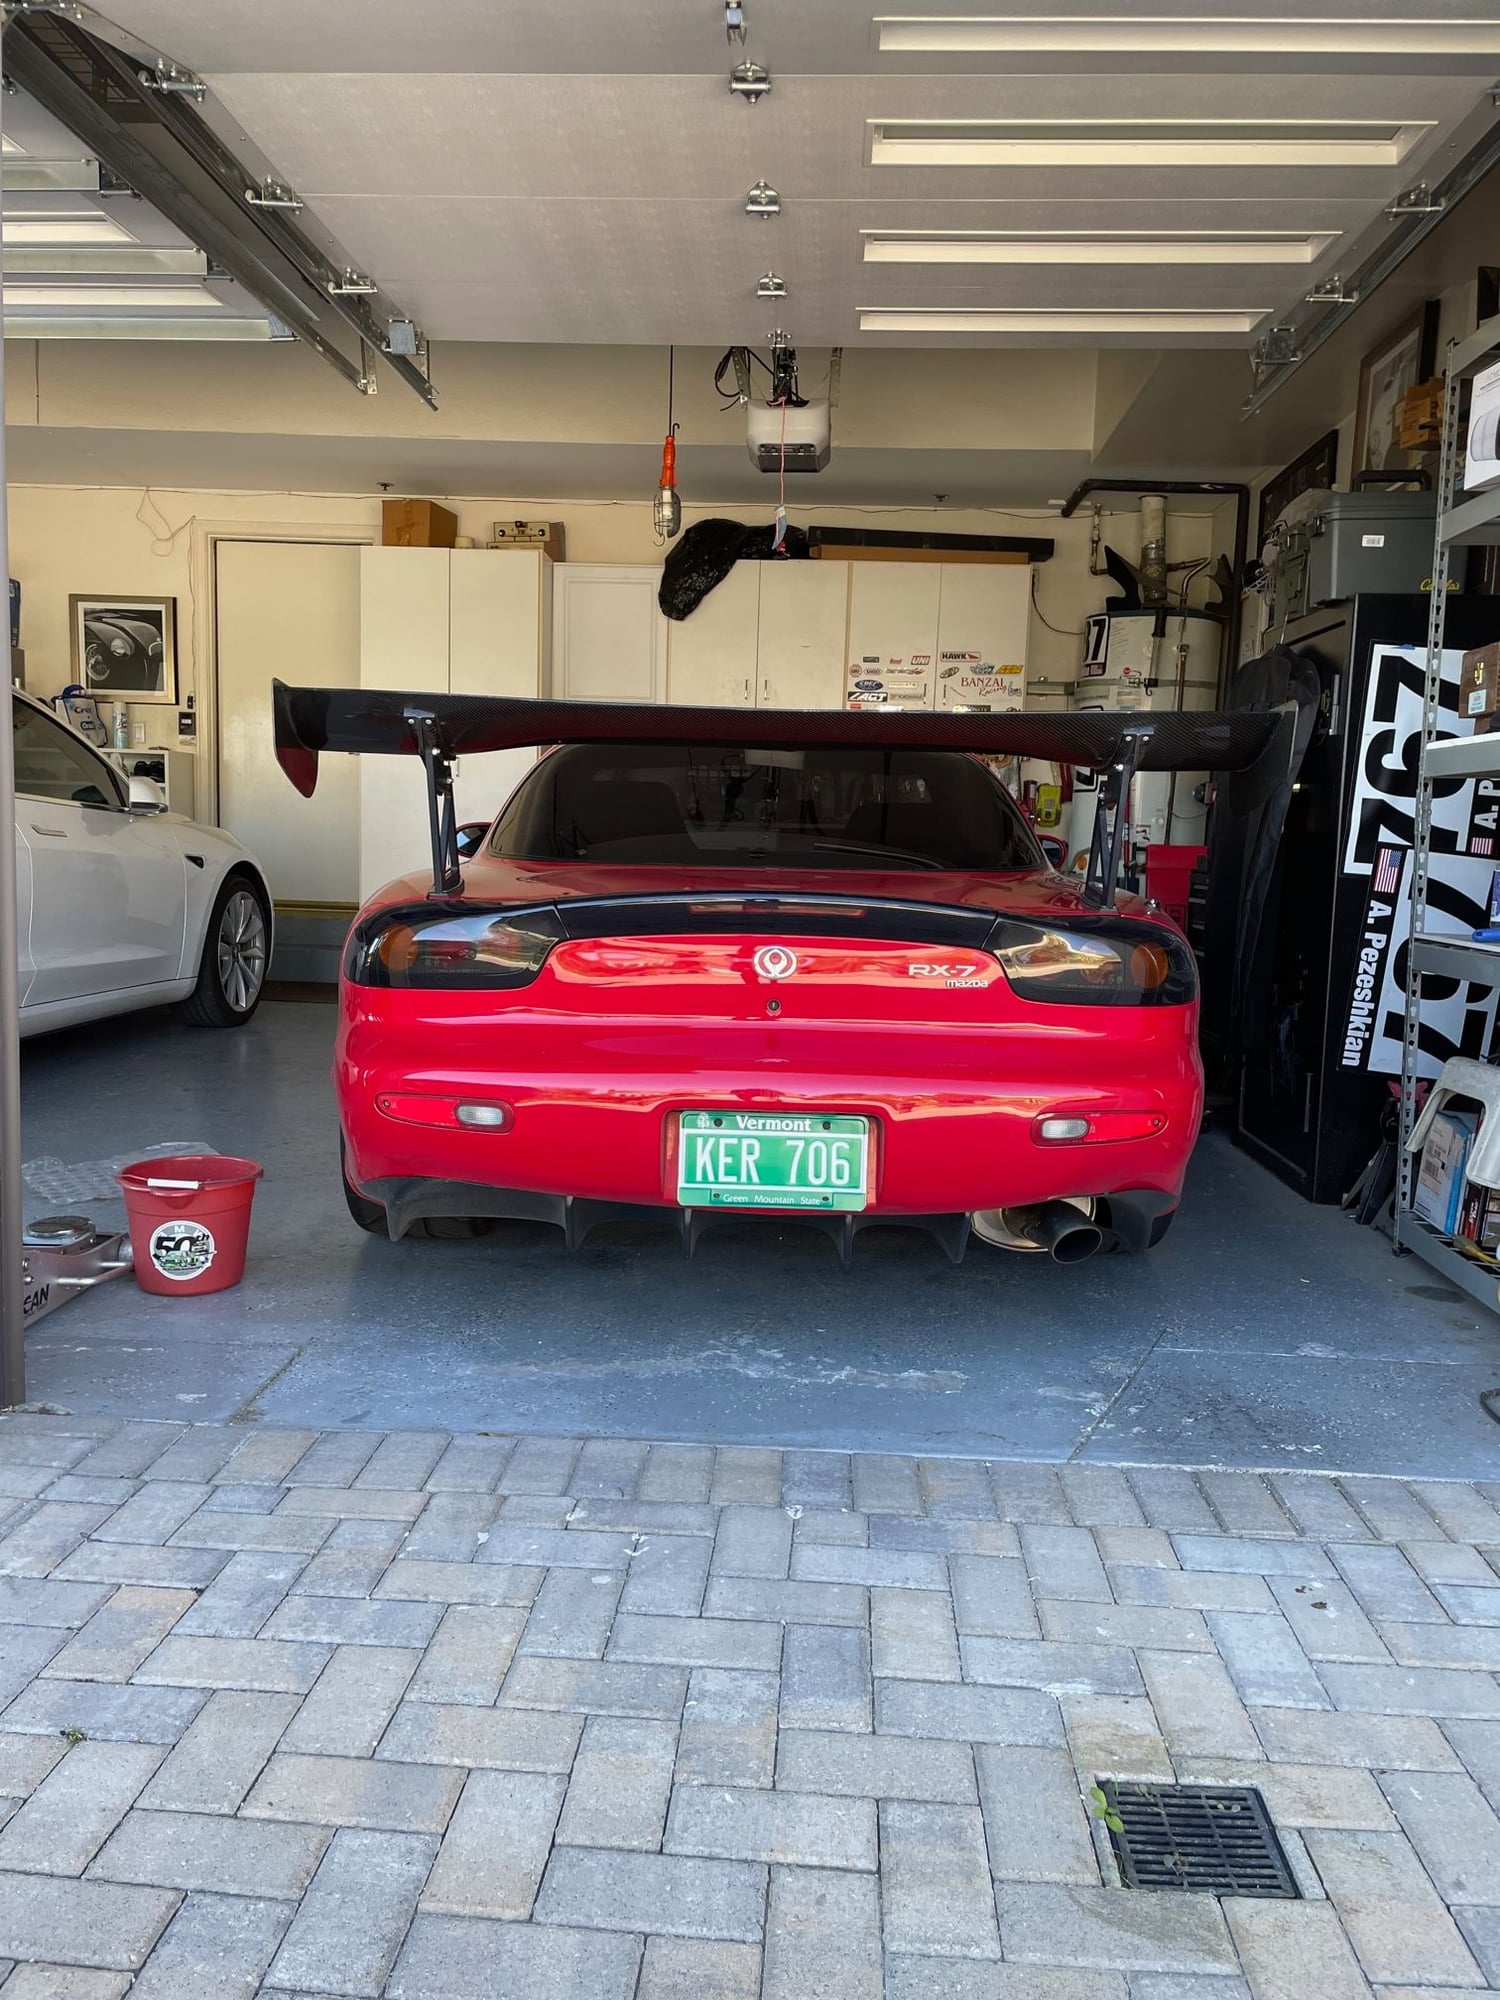 Engine - Exhaust - RE-Amemiya Dolphin tail exhaust - Used - 1993 to 2001 Mazda RX-7 - Glendale, CA 91207, United States